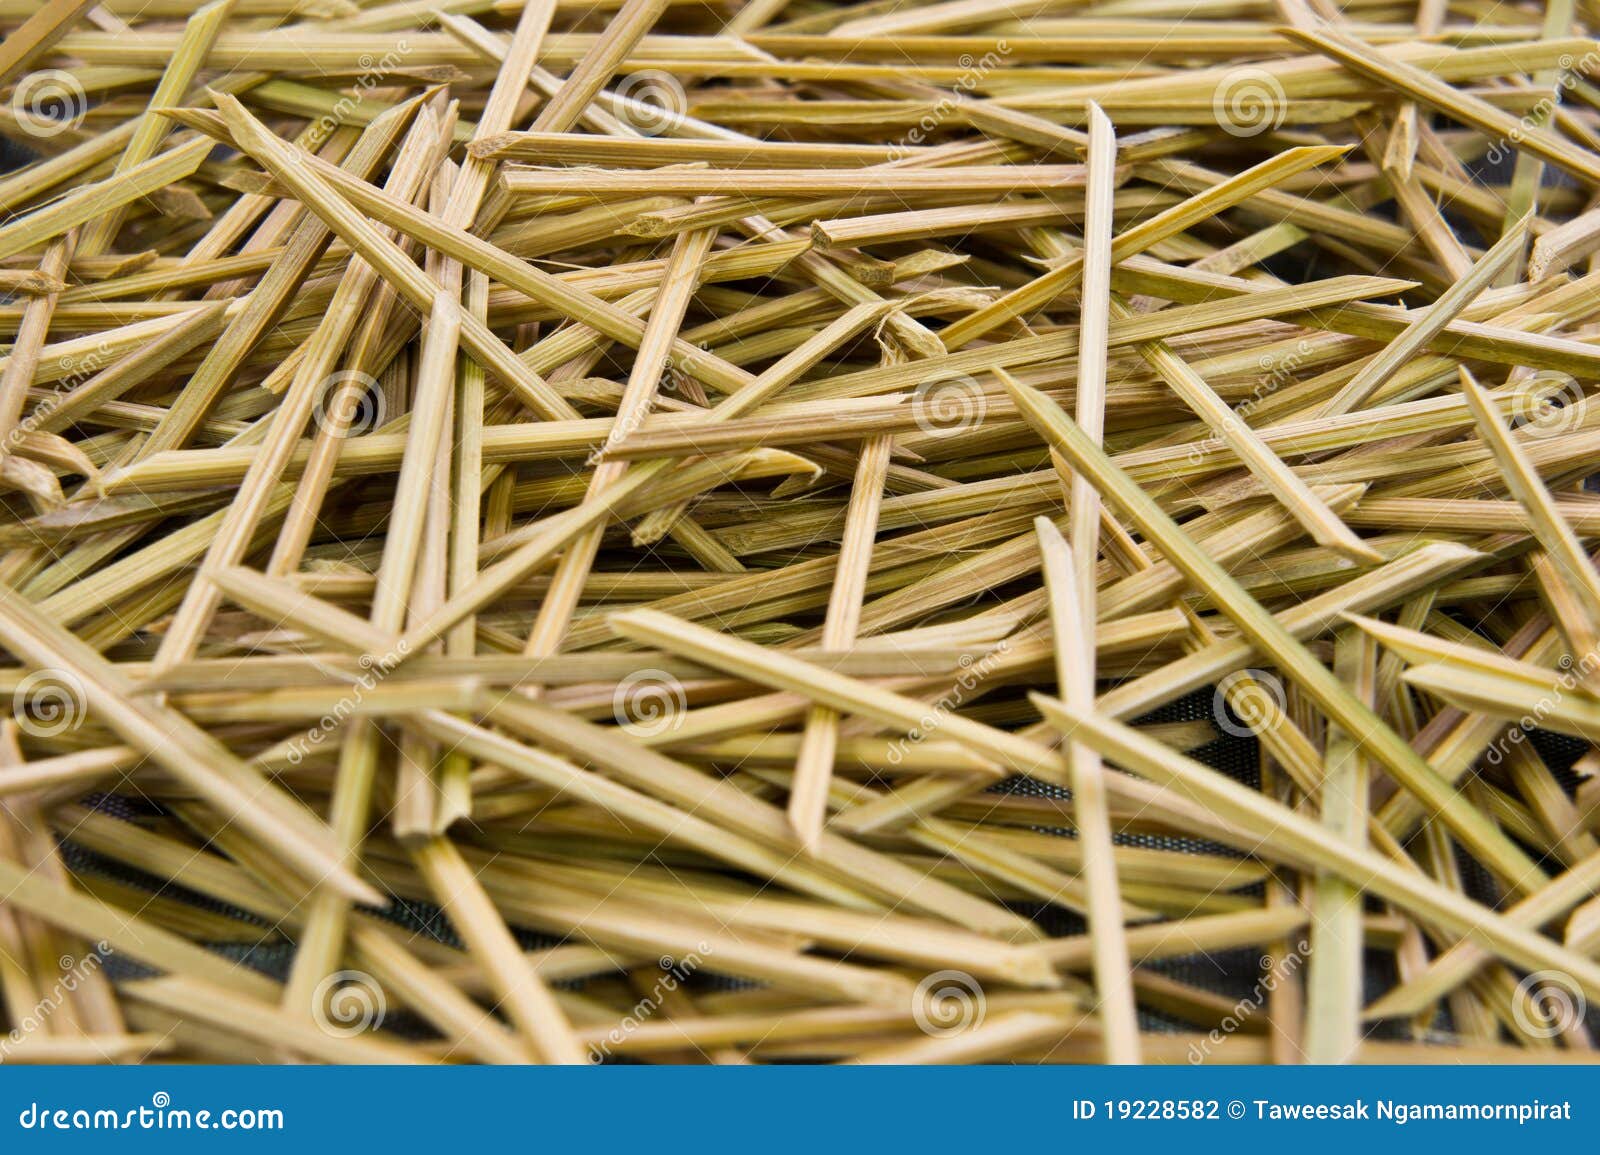 Wooden skewer stock photo. Image of wooden, group, bamboo